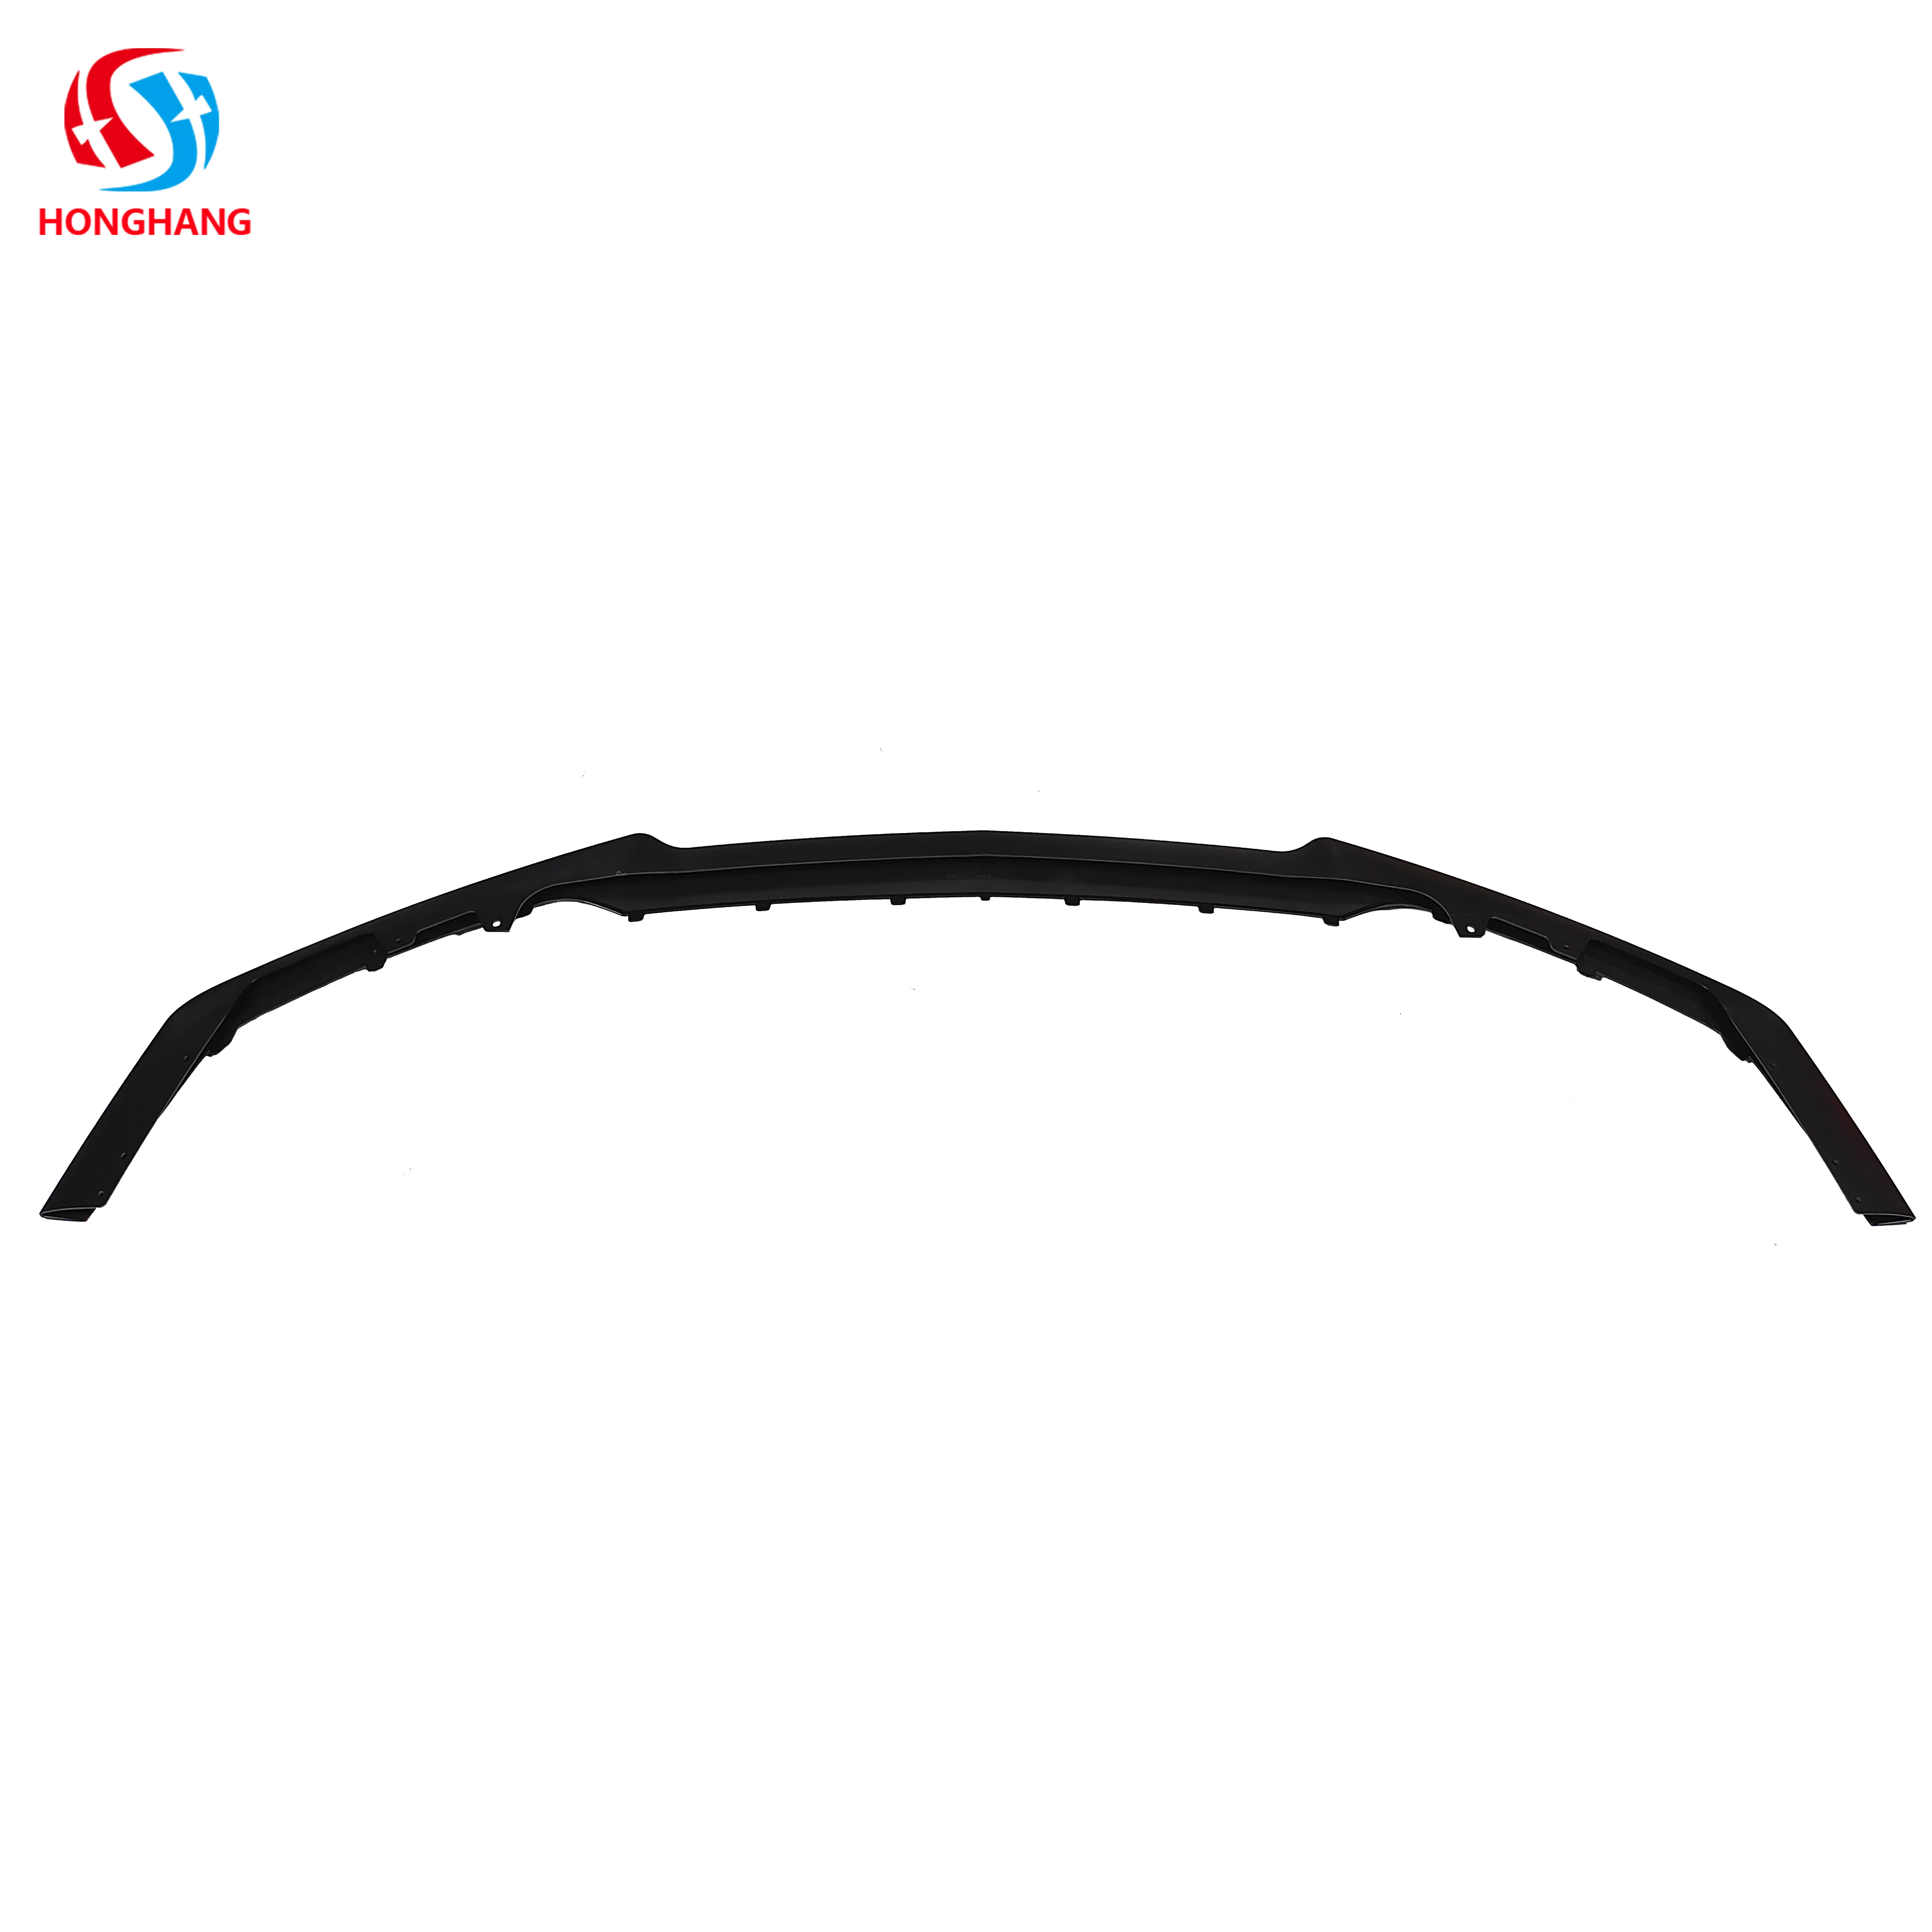 Honghang brand factory produces car front bumper, auto parts front bumper lip splitter for ford Mustang parts 2015-2021